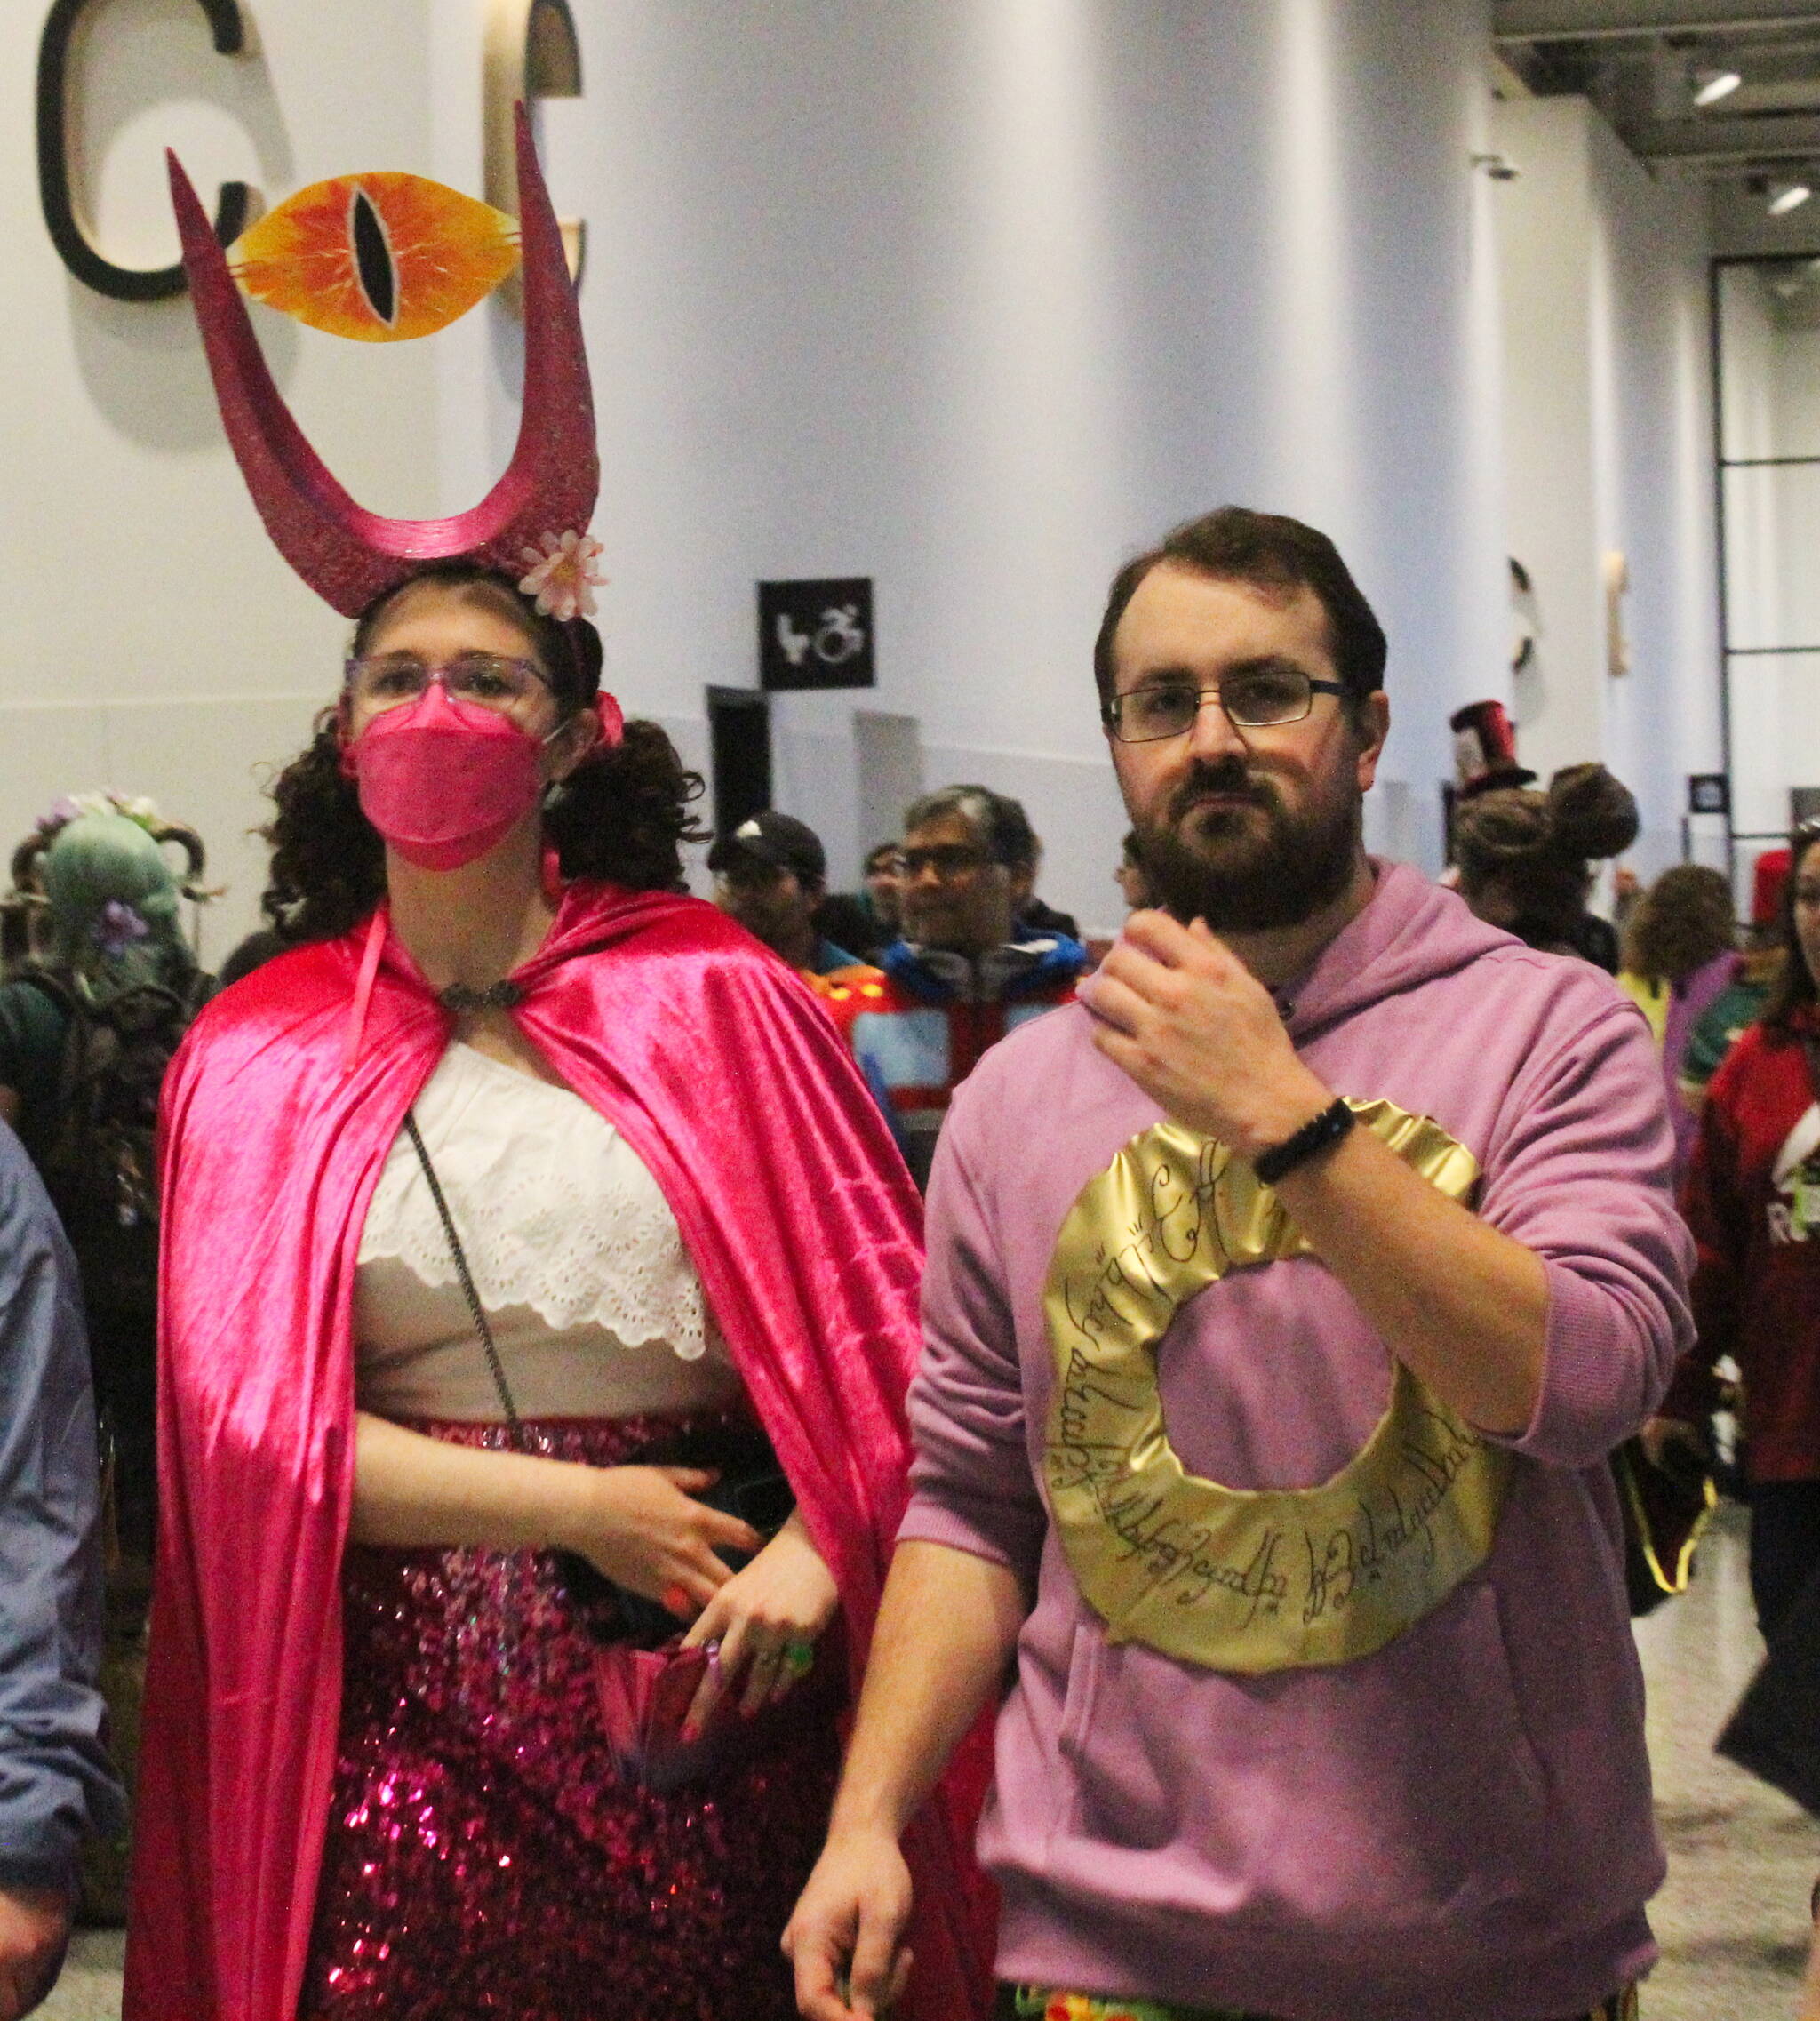 A pink-themed Eye of Sauron and The One Ring from “The Lord of the Ring” series made an appearance amongst the cosplayers at ECCC 2024. Photo by Bailey Jo Josie/Sound Publishing